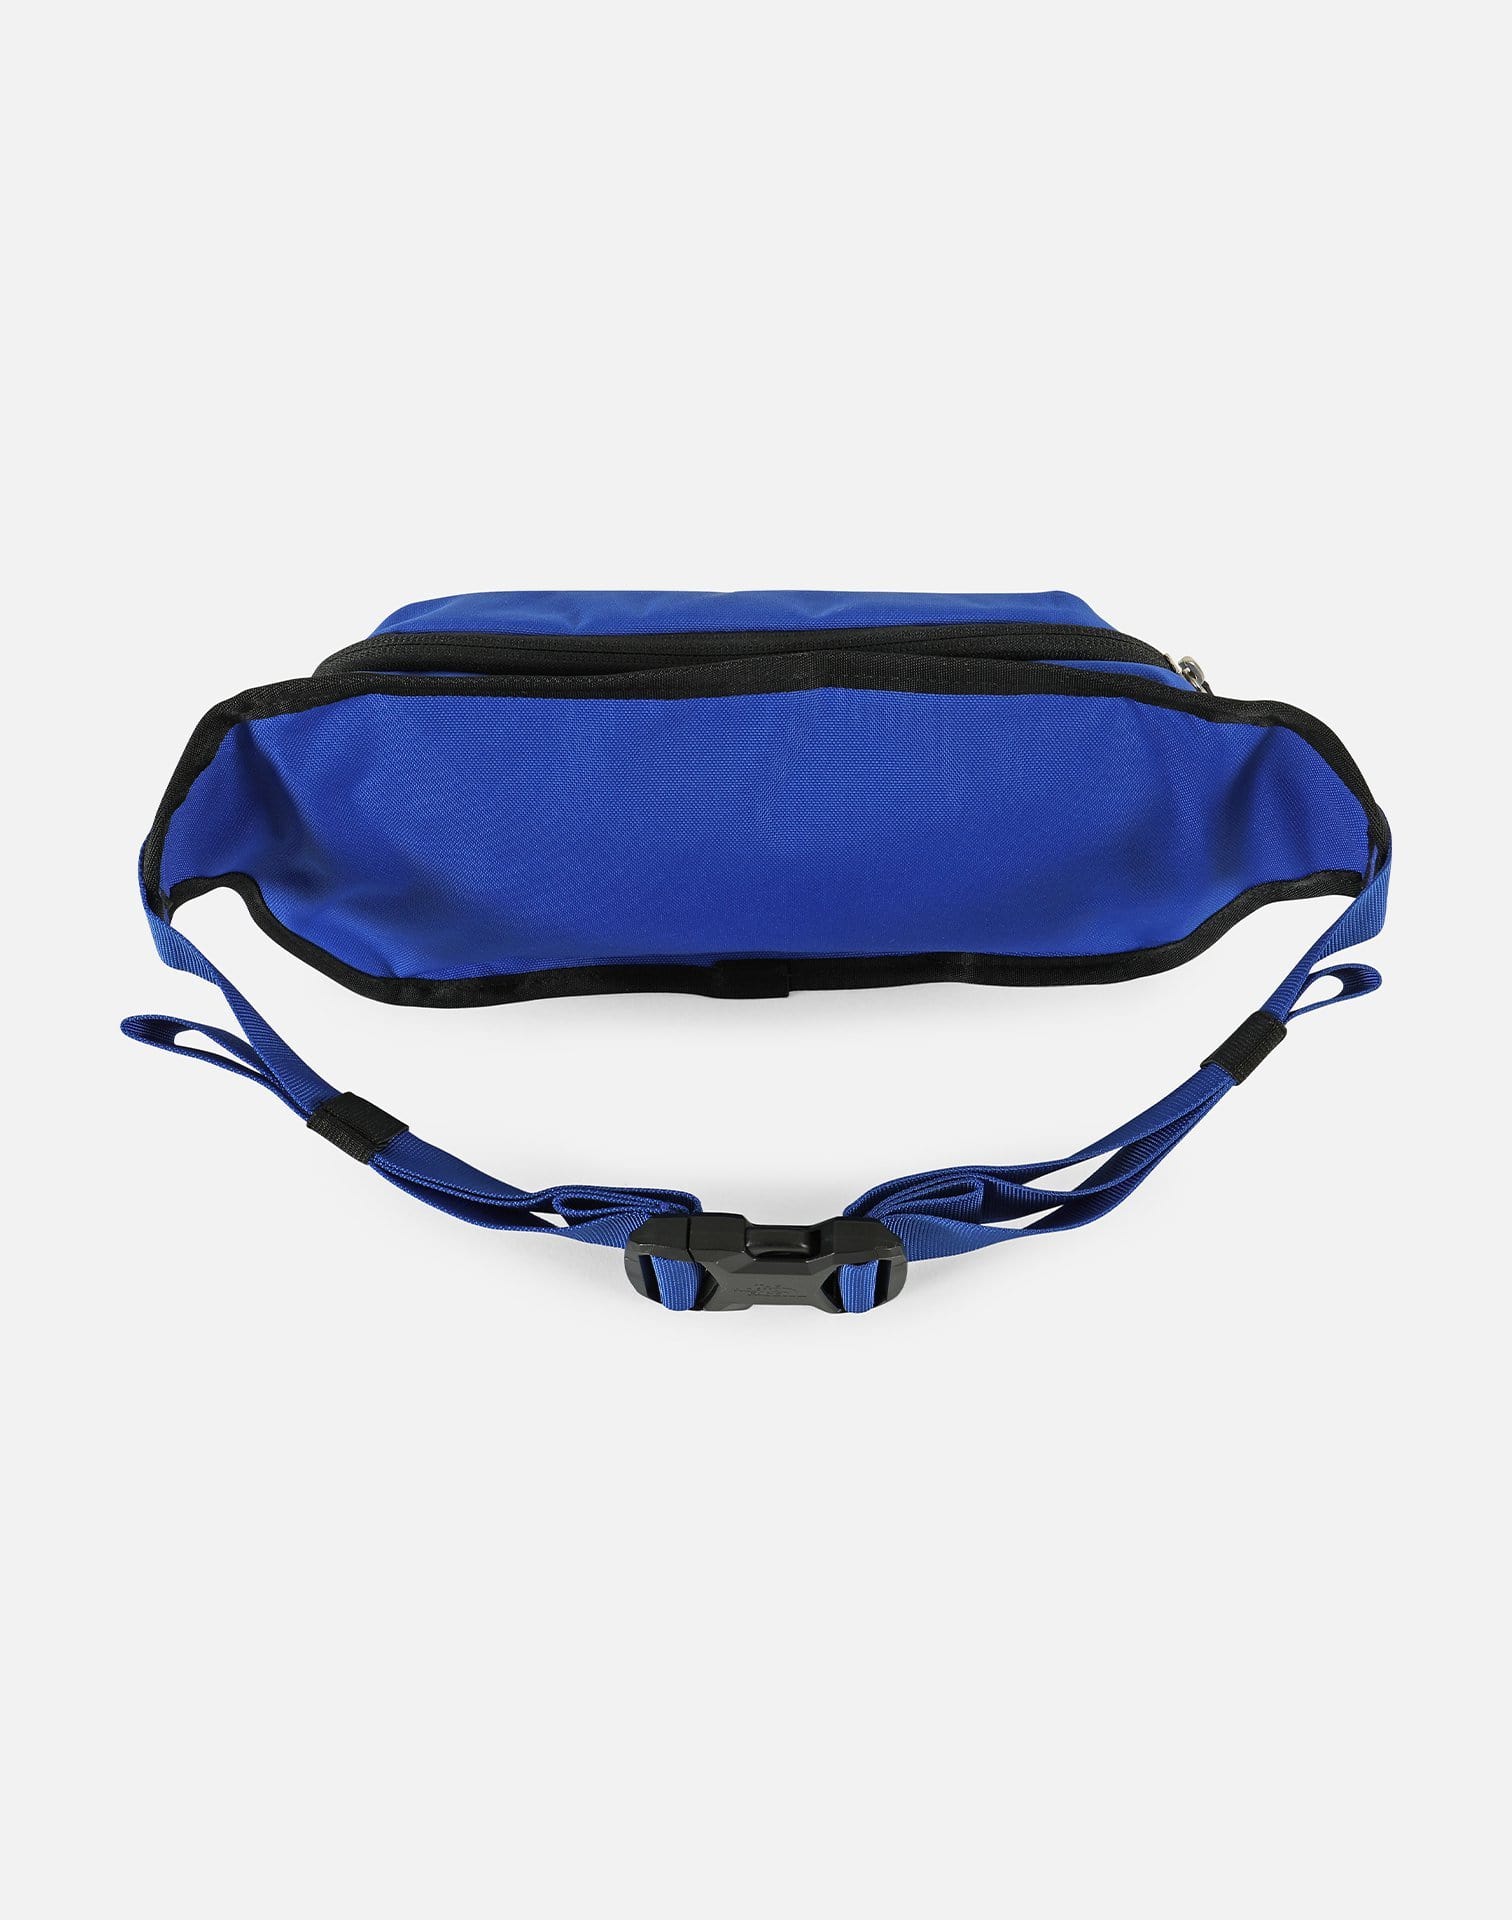 The North Face Boxer Hip Pack